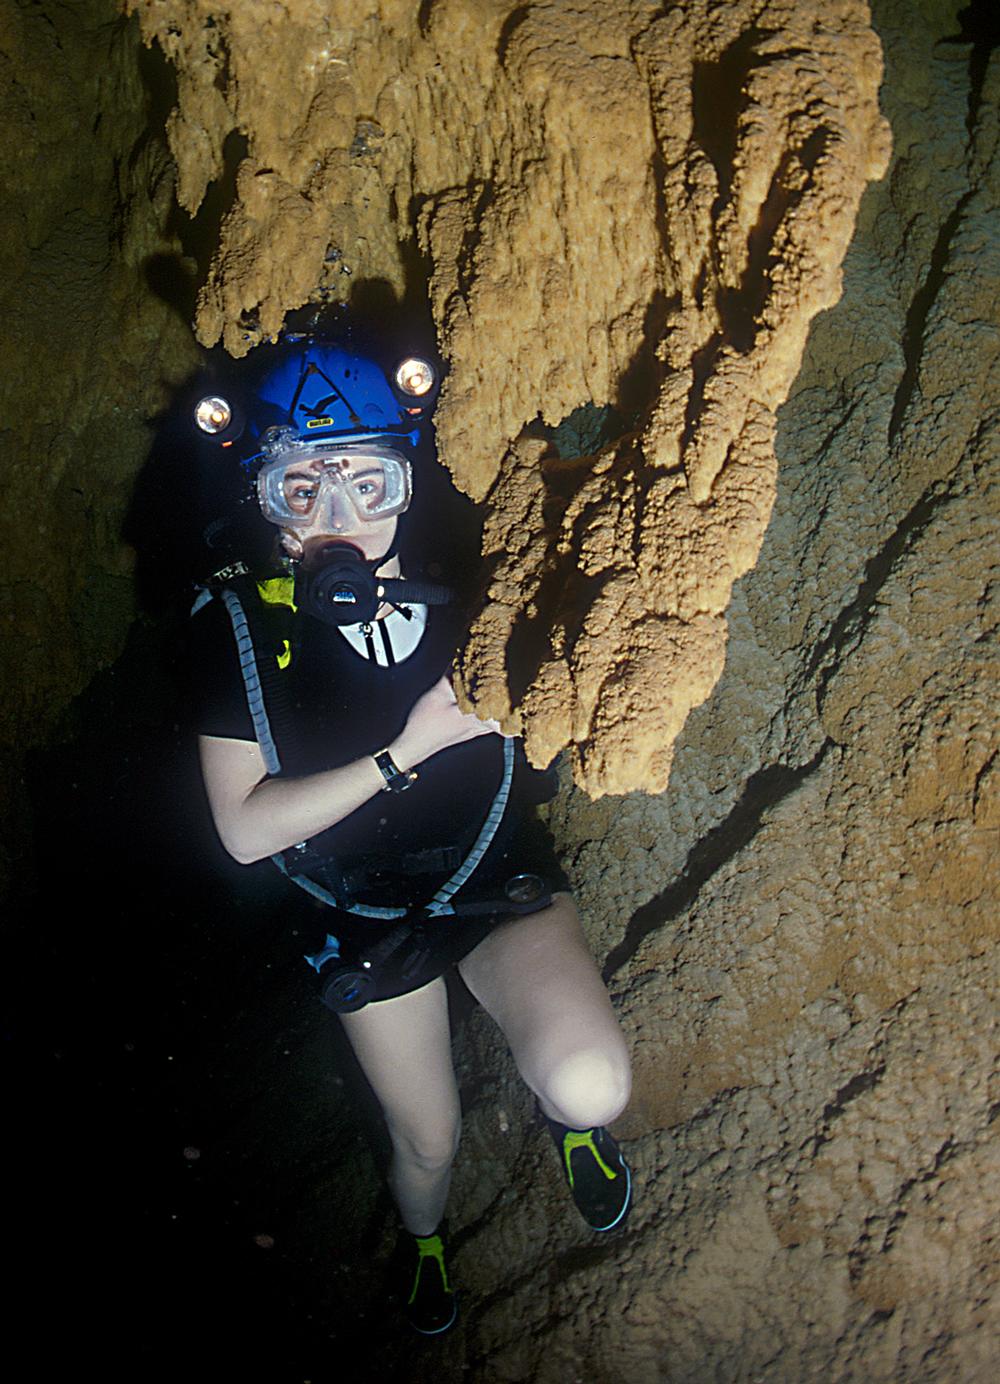 The underground cave has a lake deep enough to swim and scuba dive in